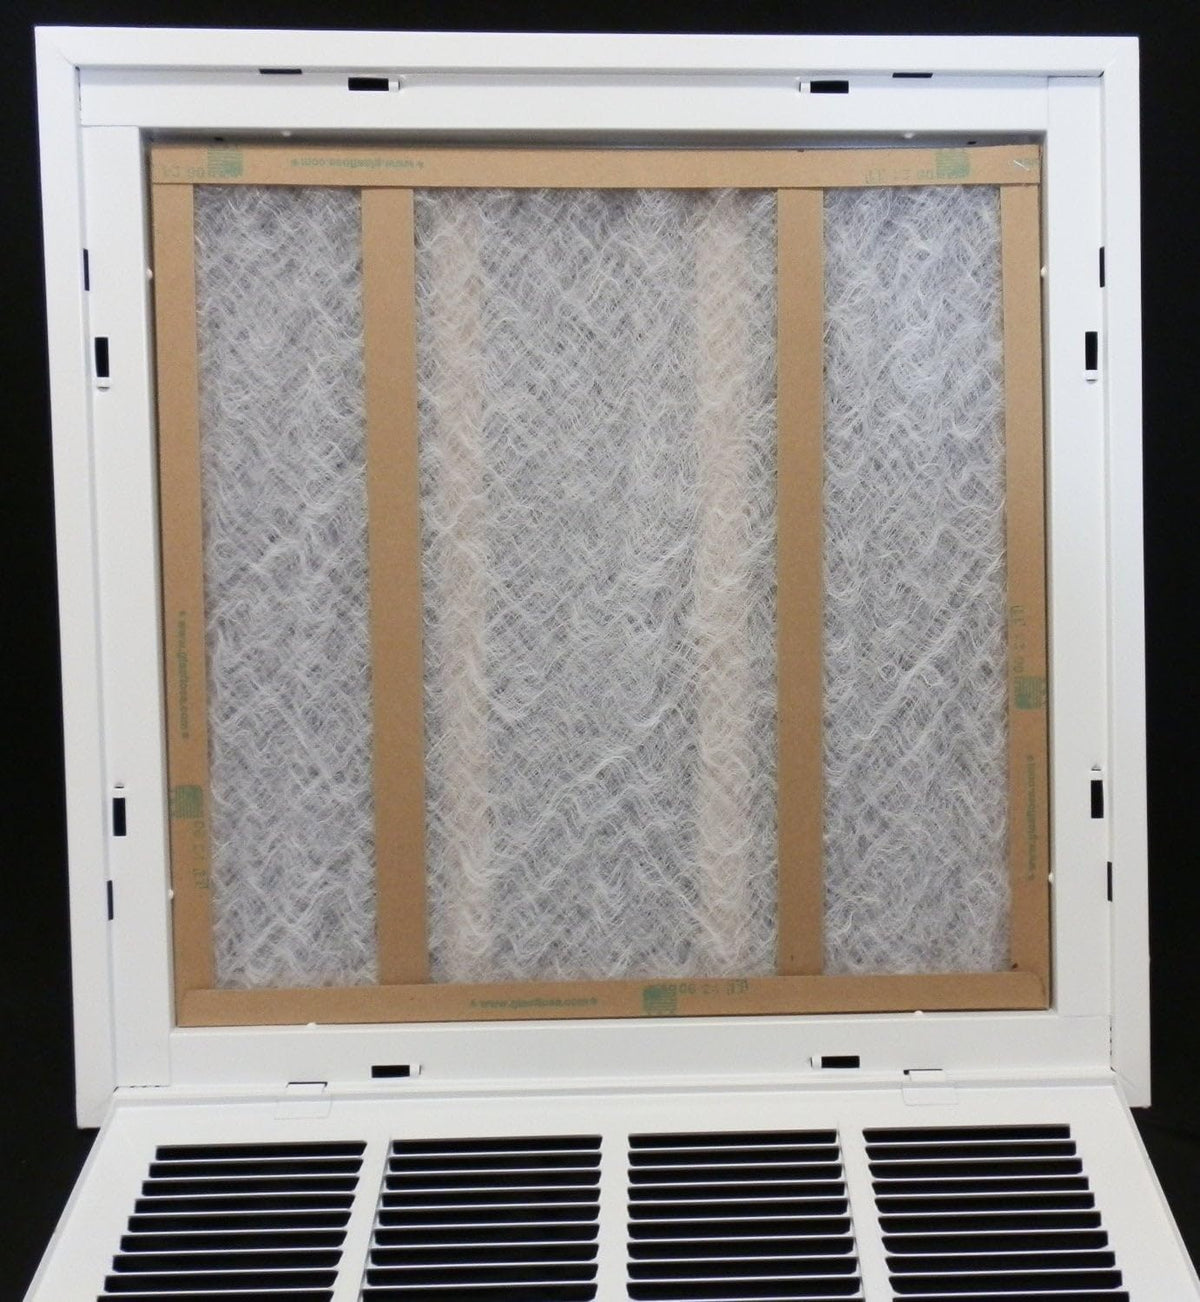 36&quot; X 28&quot; Steel Return Air Filter Grille for 1&quot; Filter - Removable Frame - [Outer Dimensions: 38 5/8&quot; X 30 5/8&quot;]